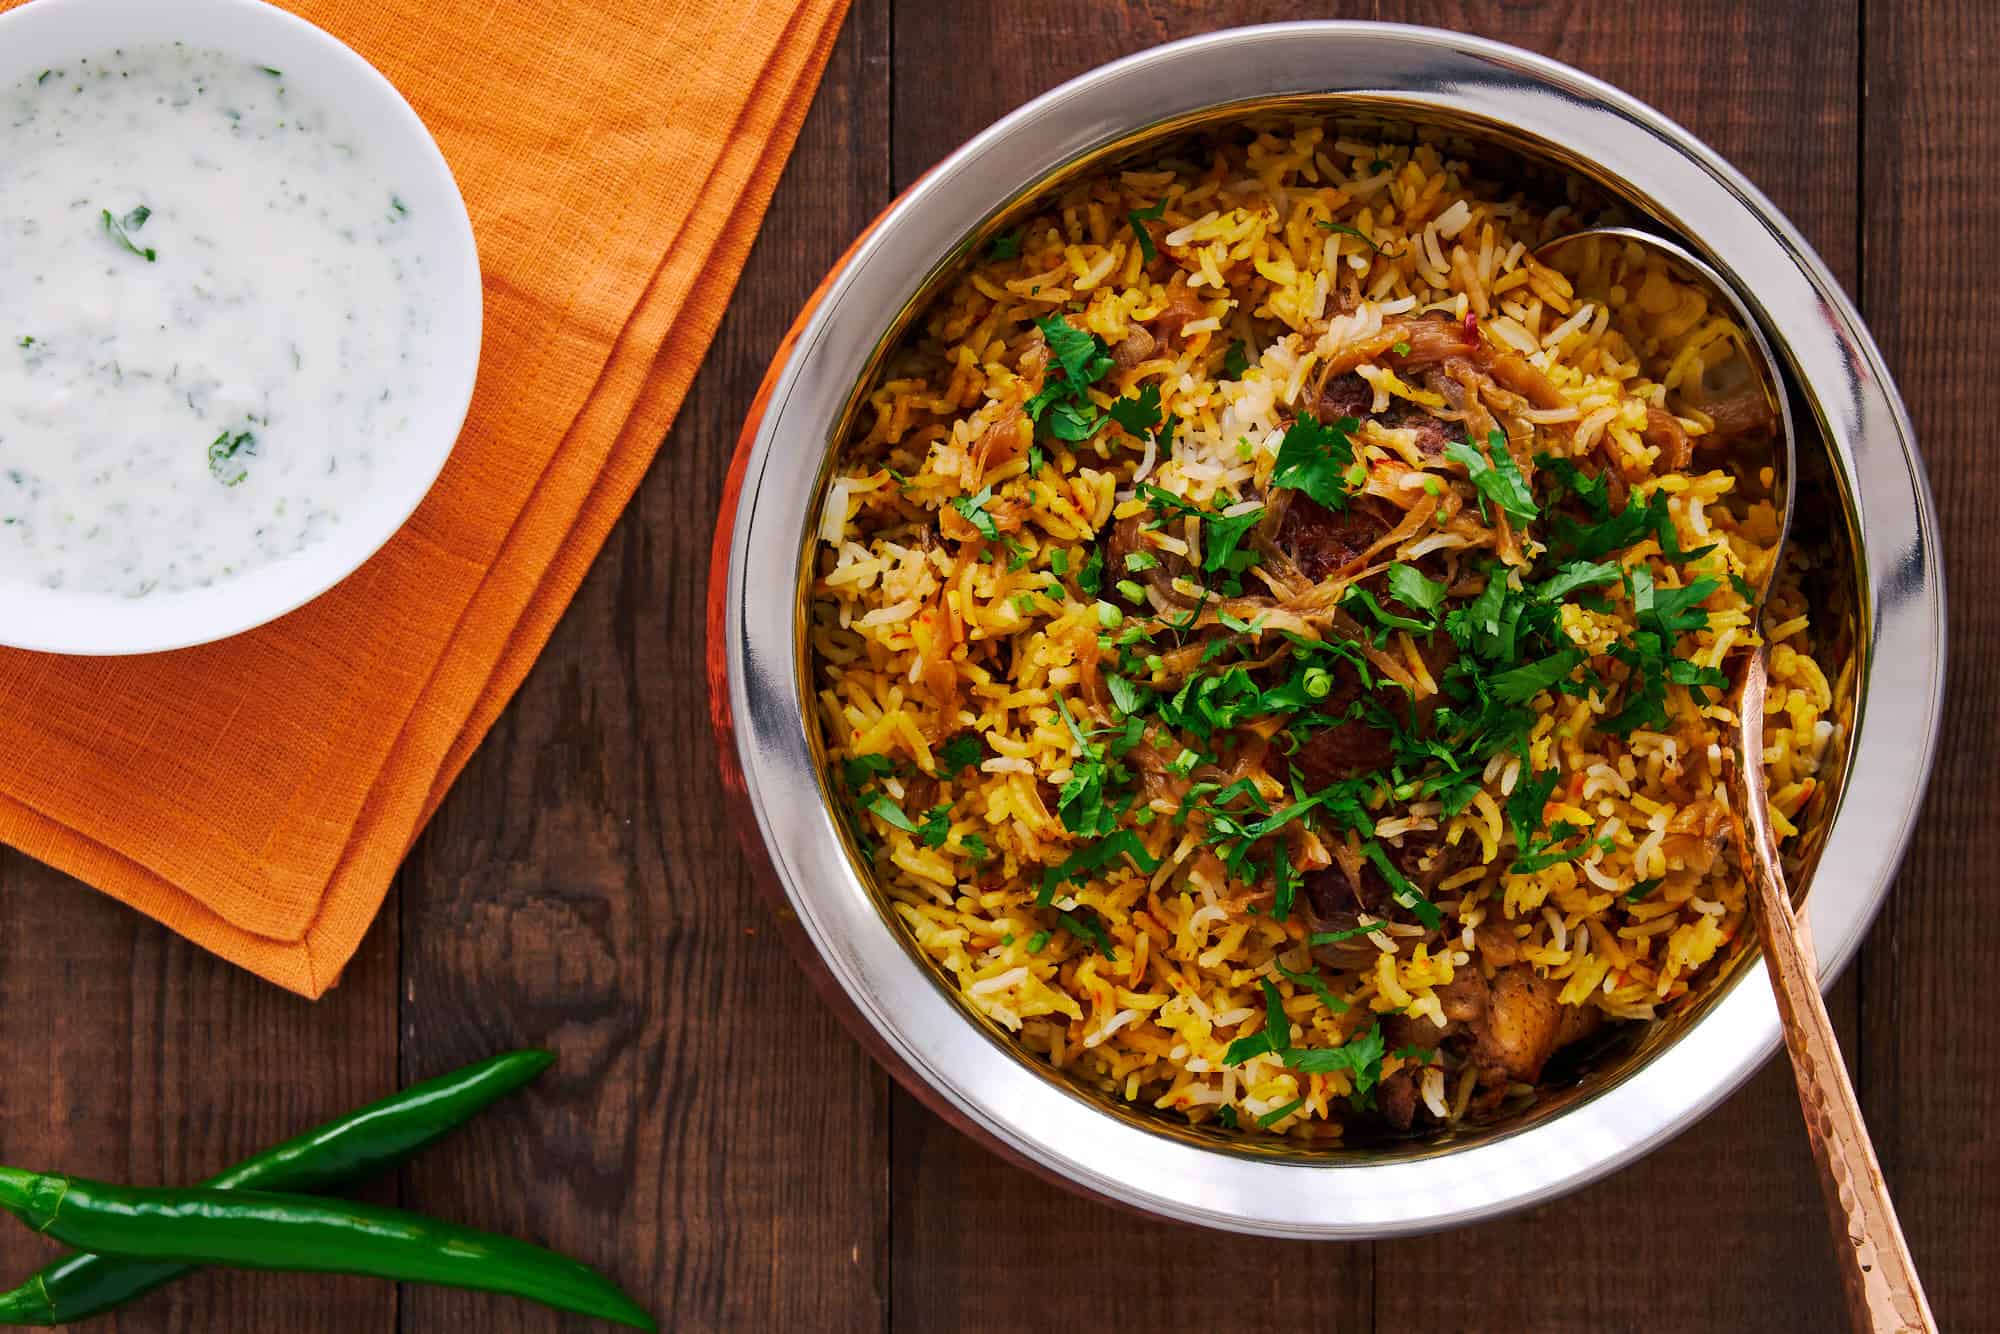 Tender chicken and aromatic rice come together in a heavenly blend of spices and herbs in this chicken biryani.